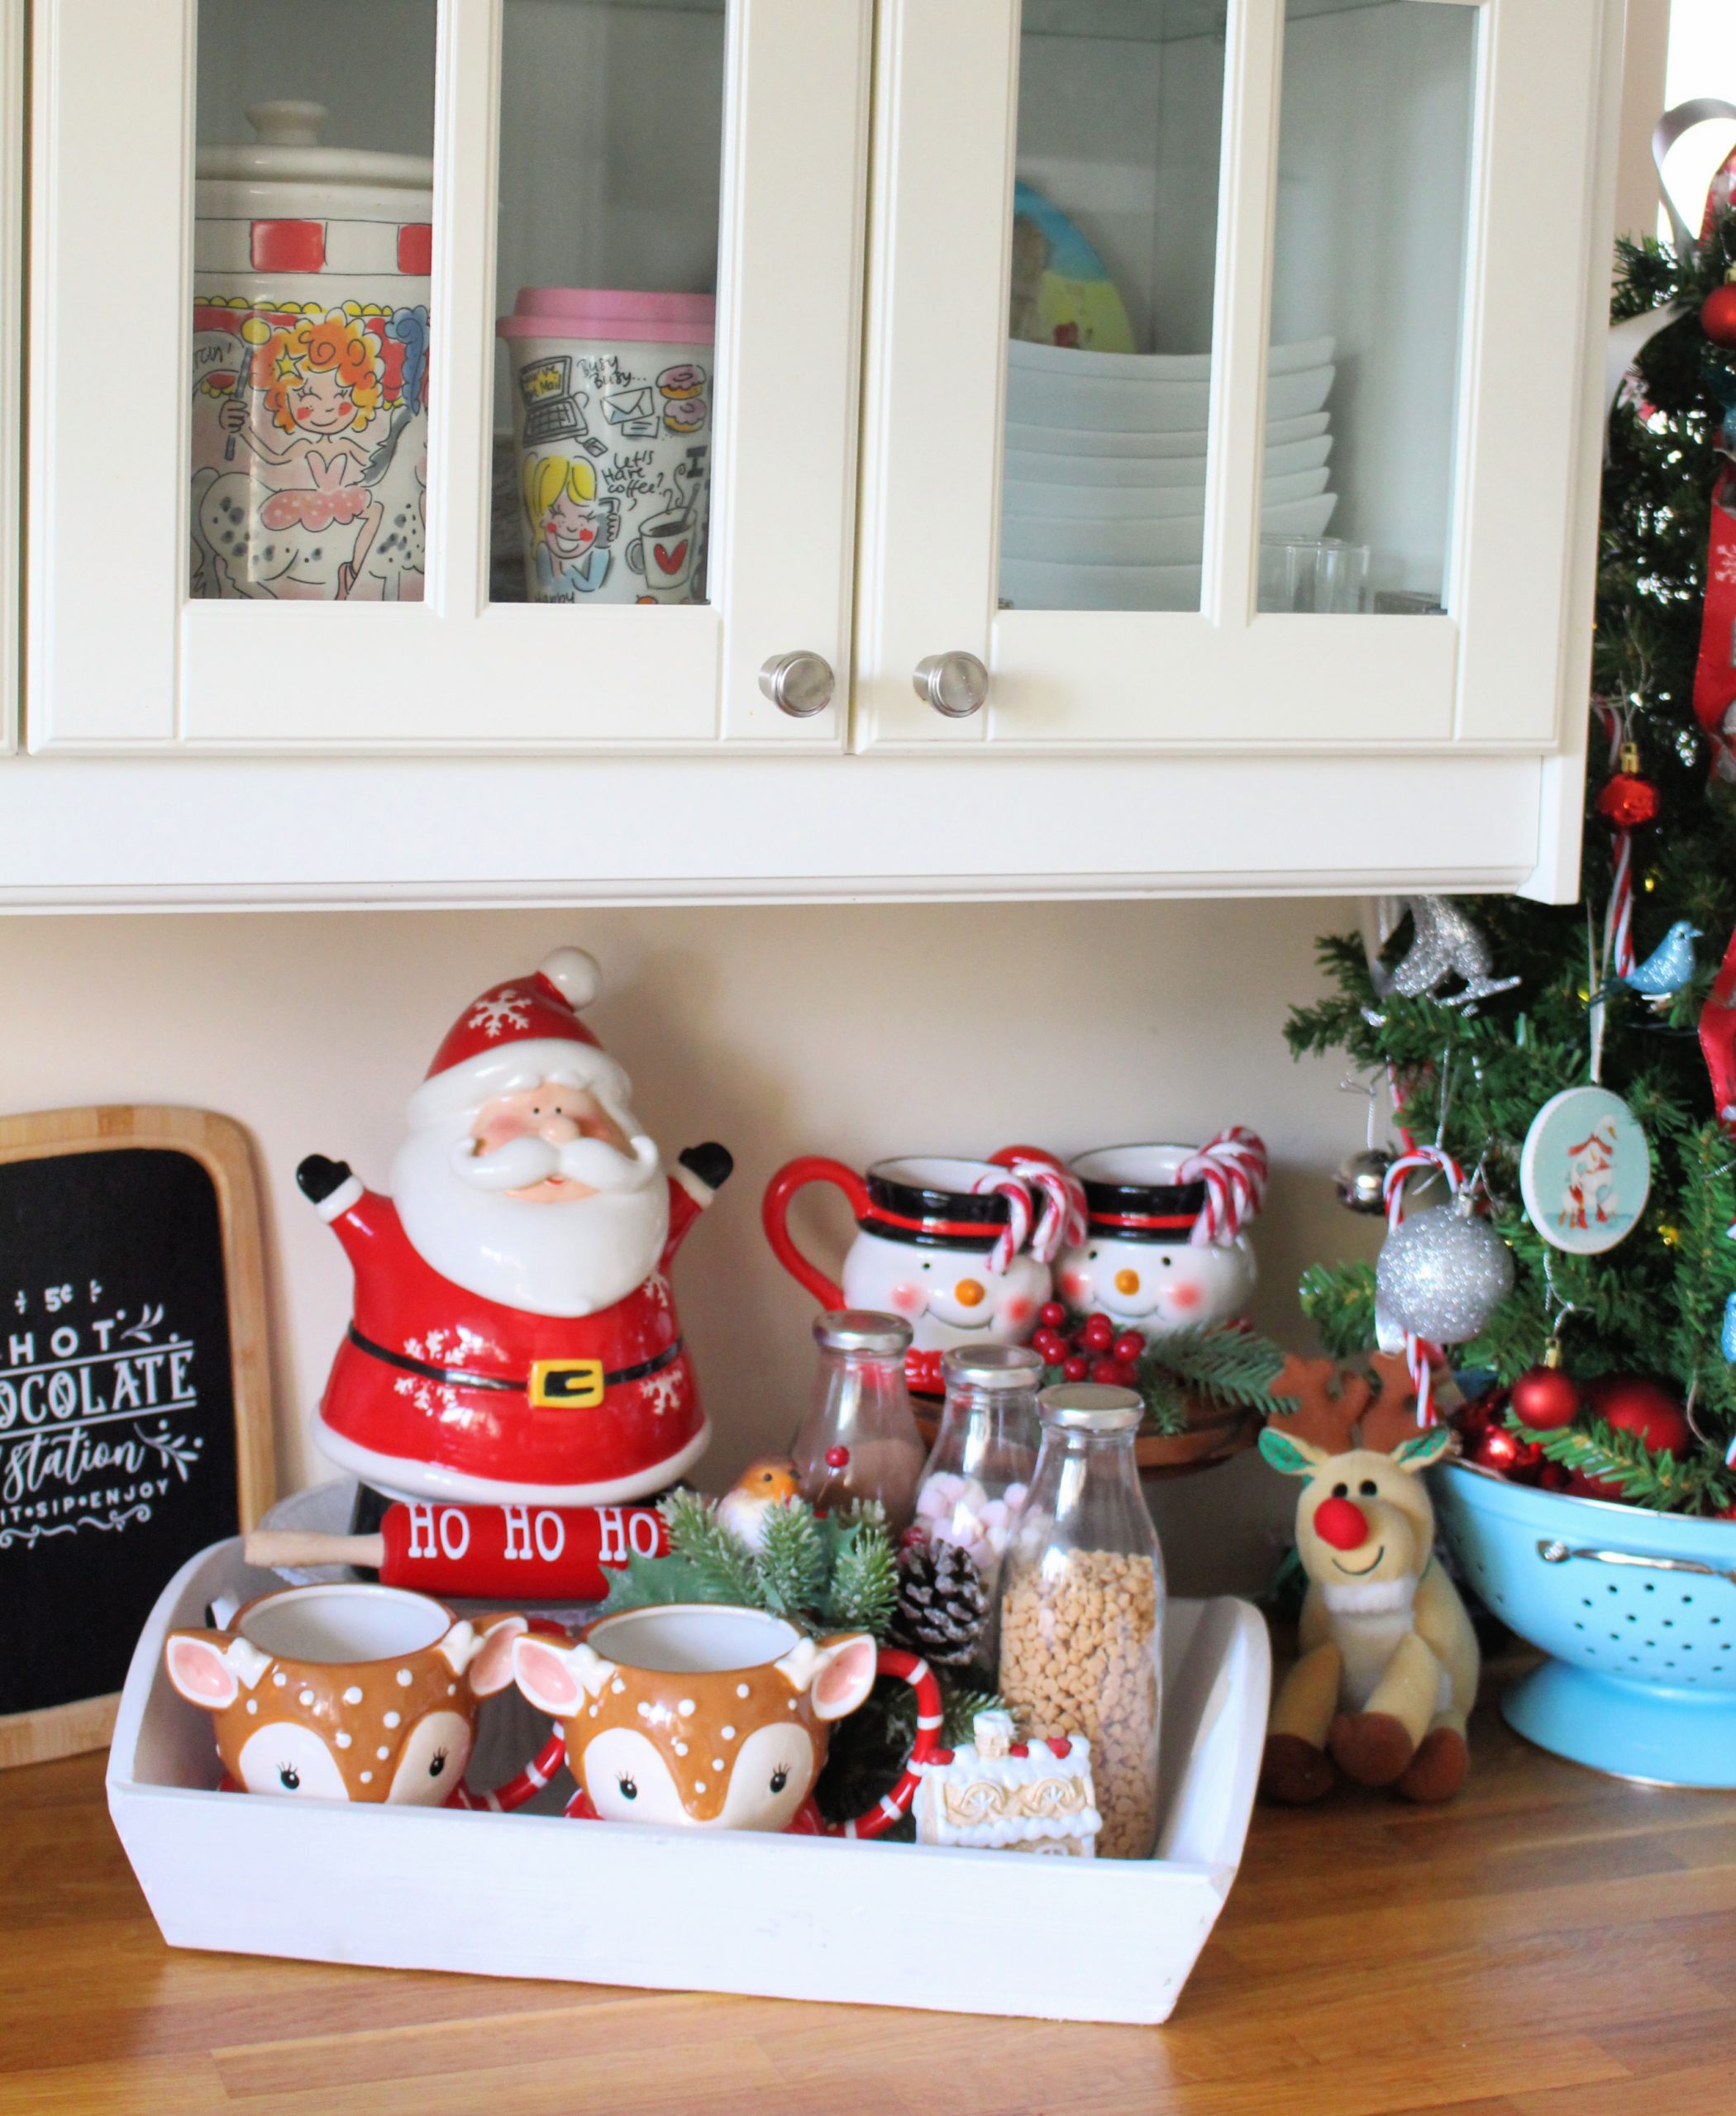 How to Set Up a Hot Cocoa Station at Home